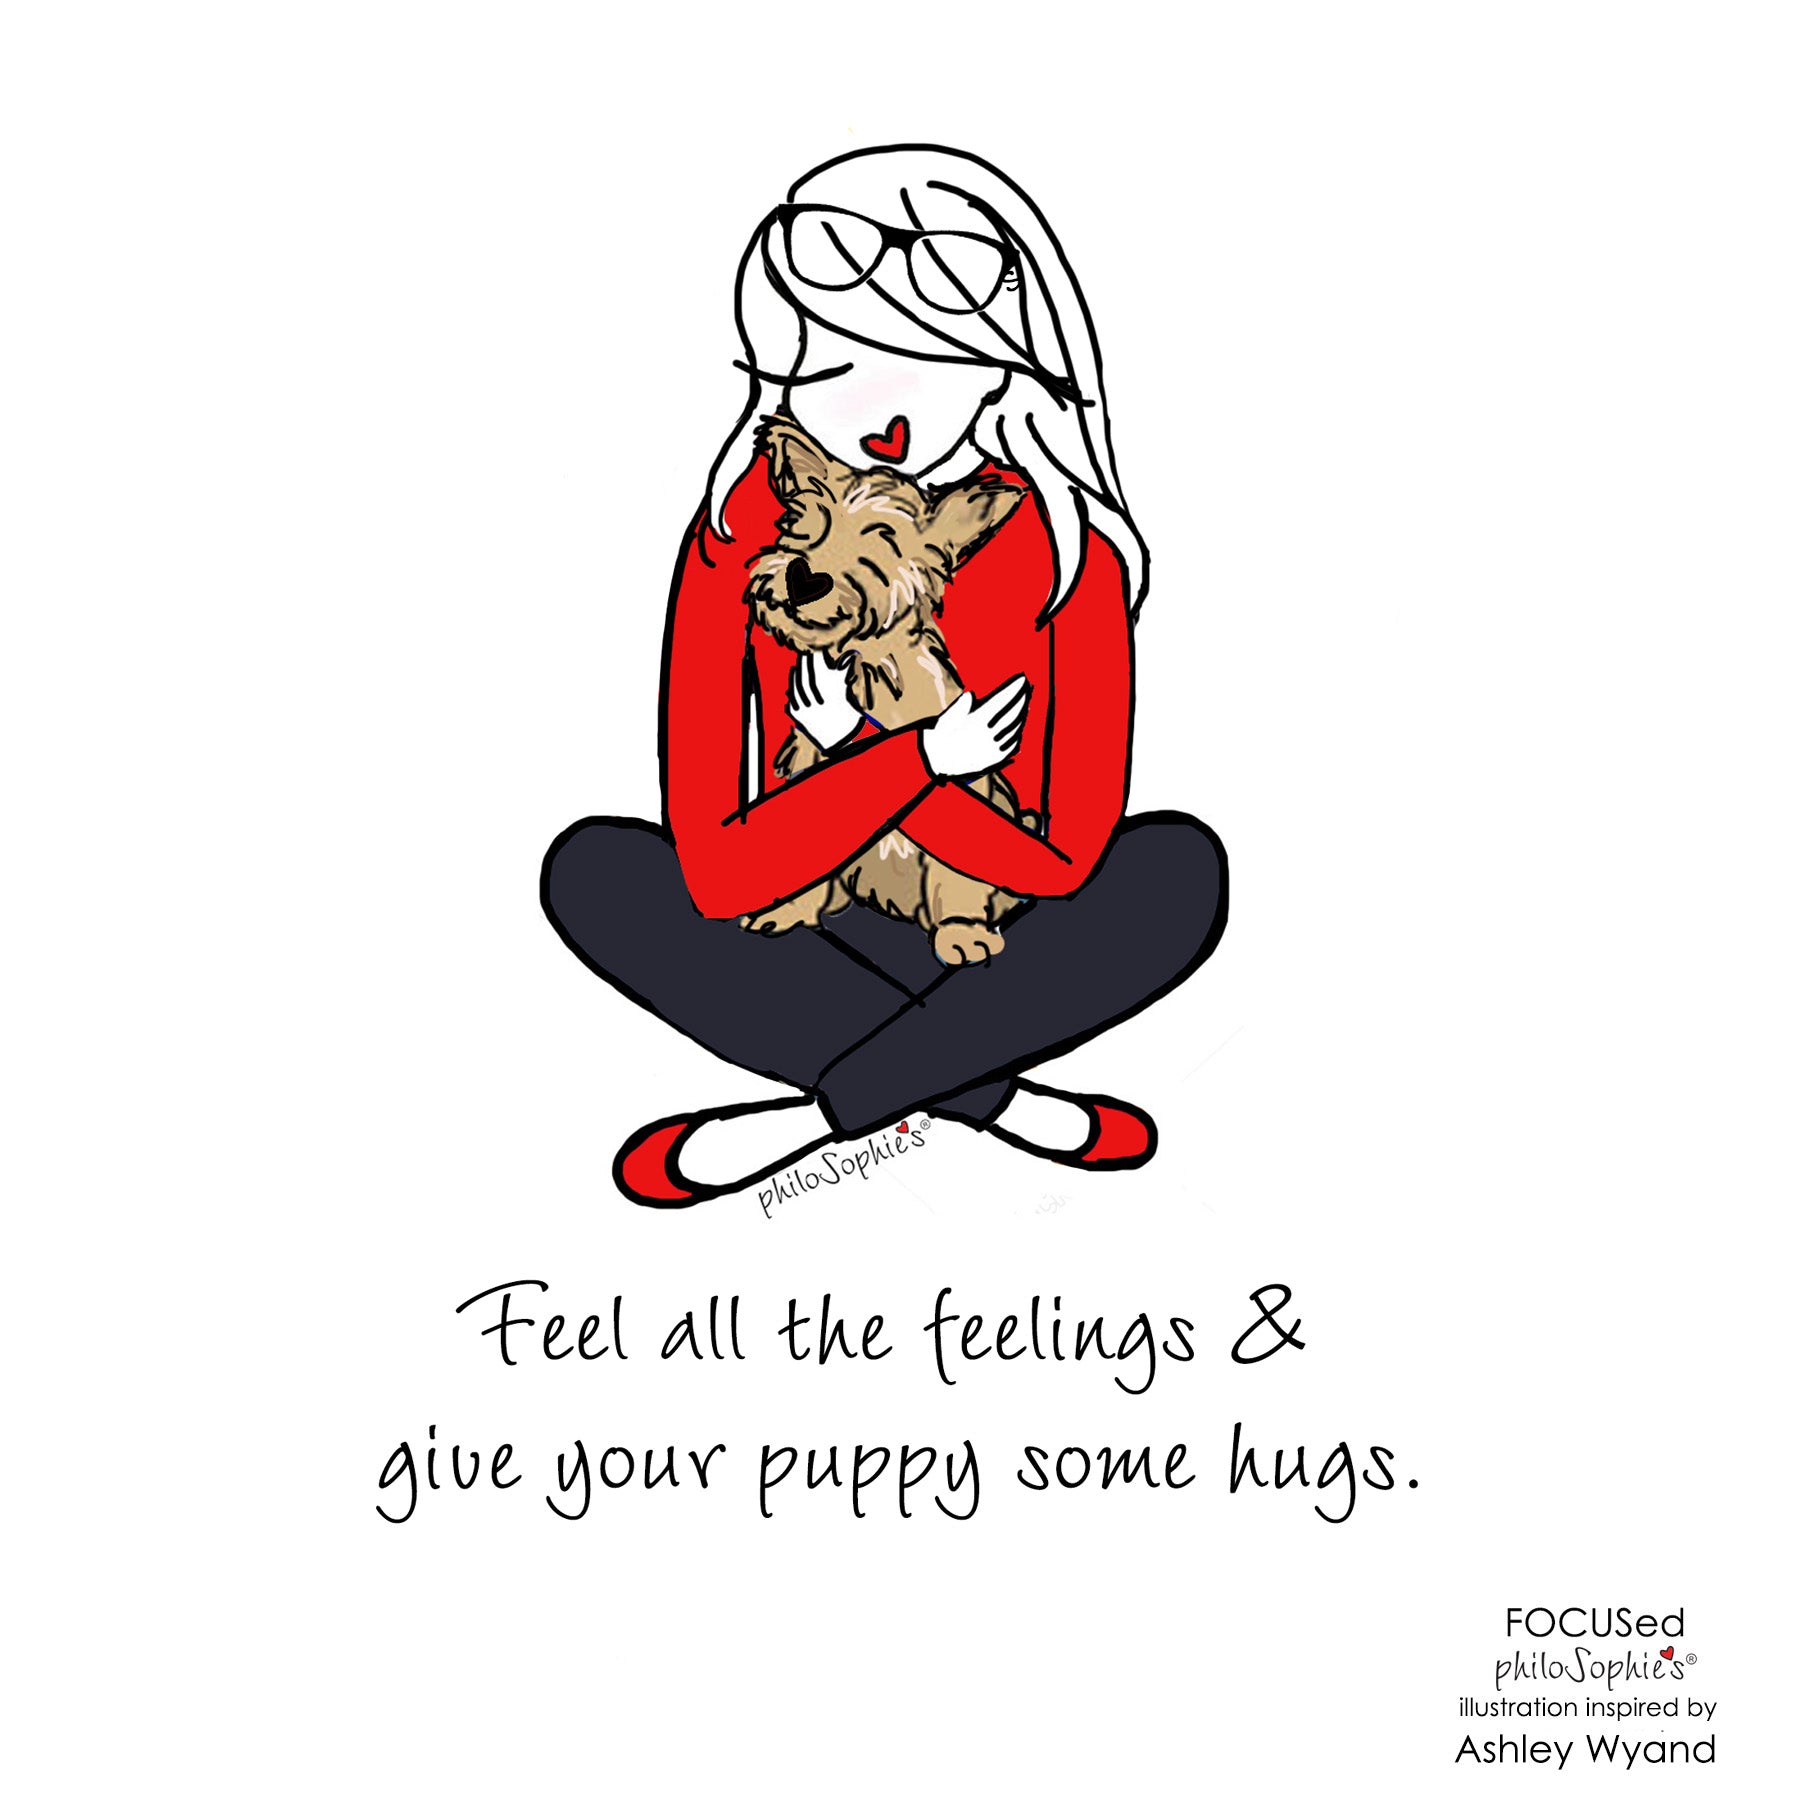 FOCUSed philoSophie's - "Feel all the feelings and give your puppy some hugs."